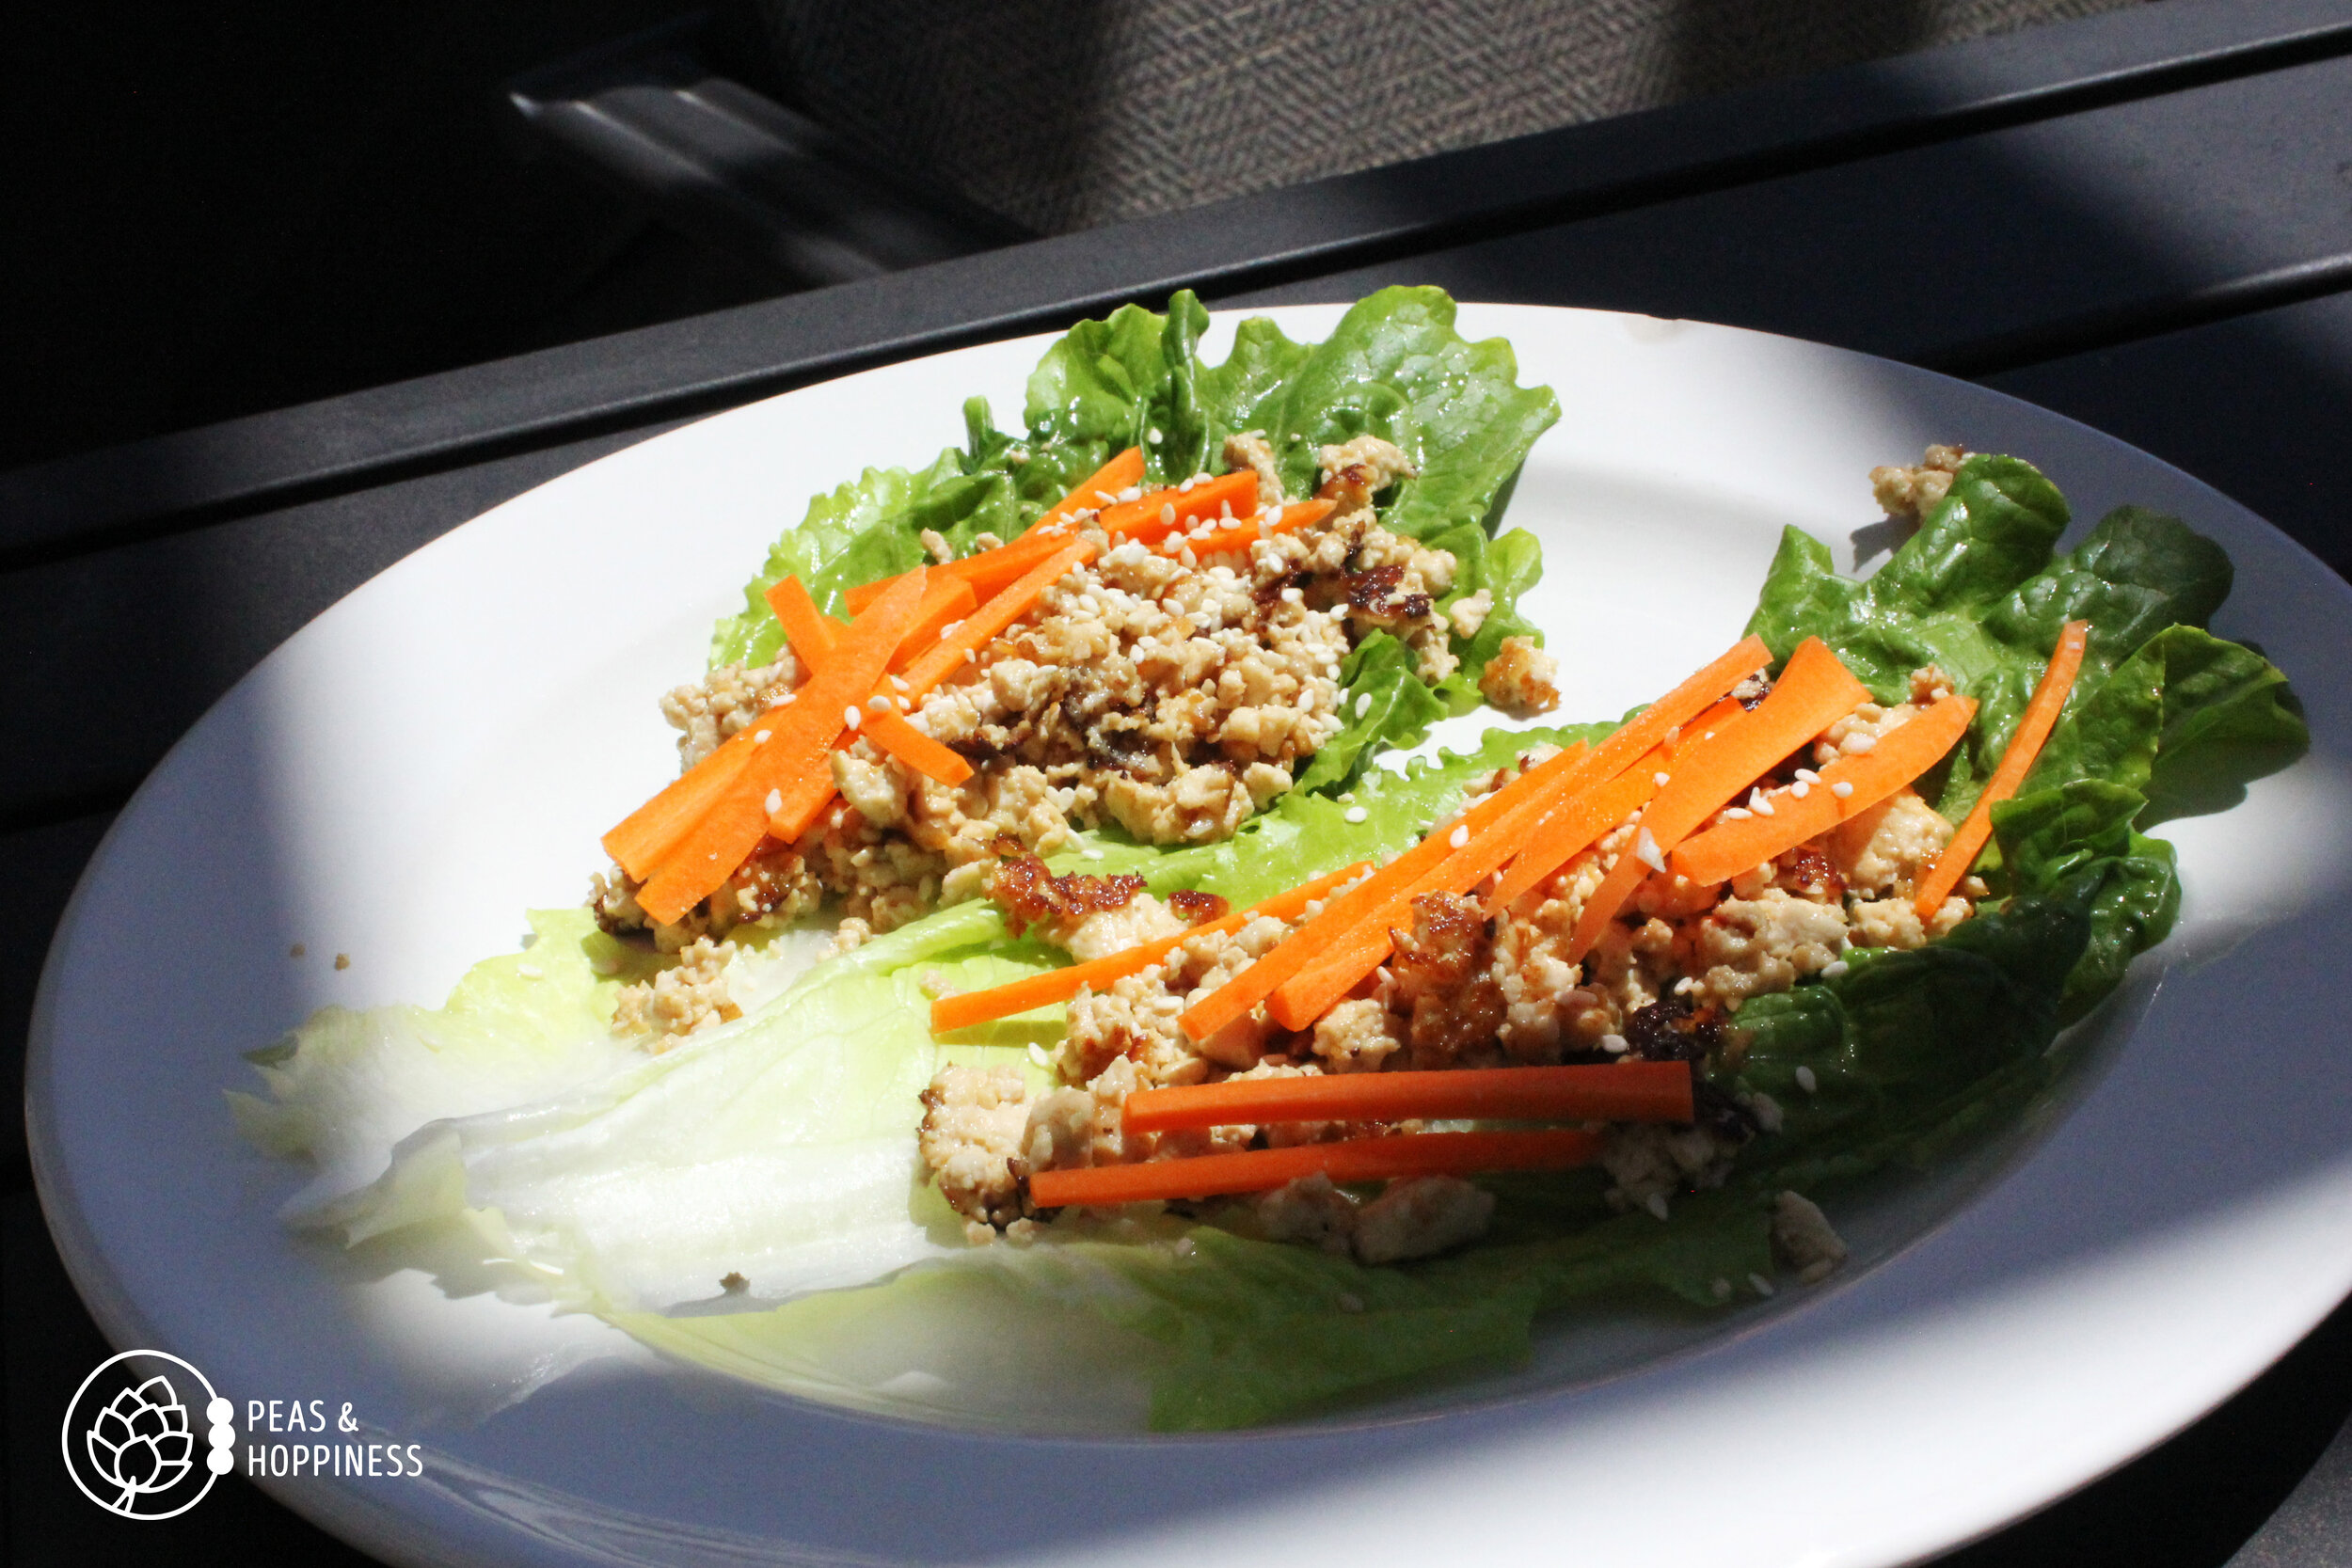 Asian Tofu Lettuce Wraps using tofu crumbles, featured on the Vegetarian Peas &amp; Hoppy Meal Guides. Tofu crumbles are a simple, minimally processed vegan protein which assumes the flavor of whatever you add to it.